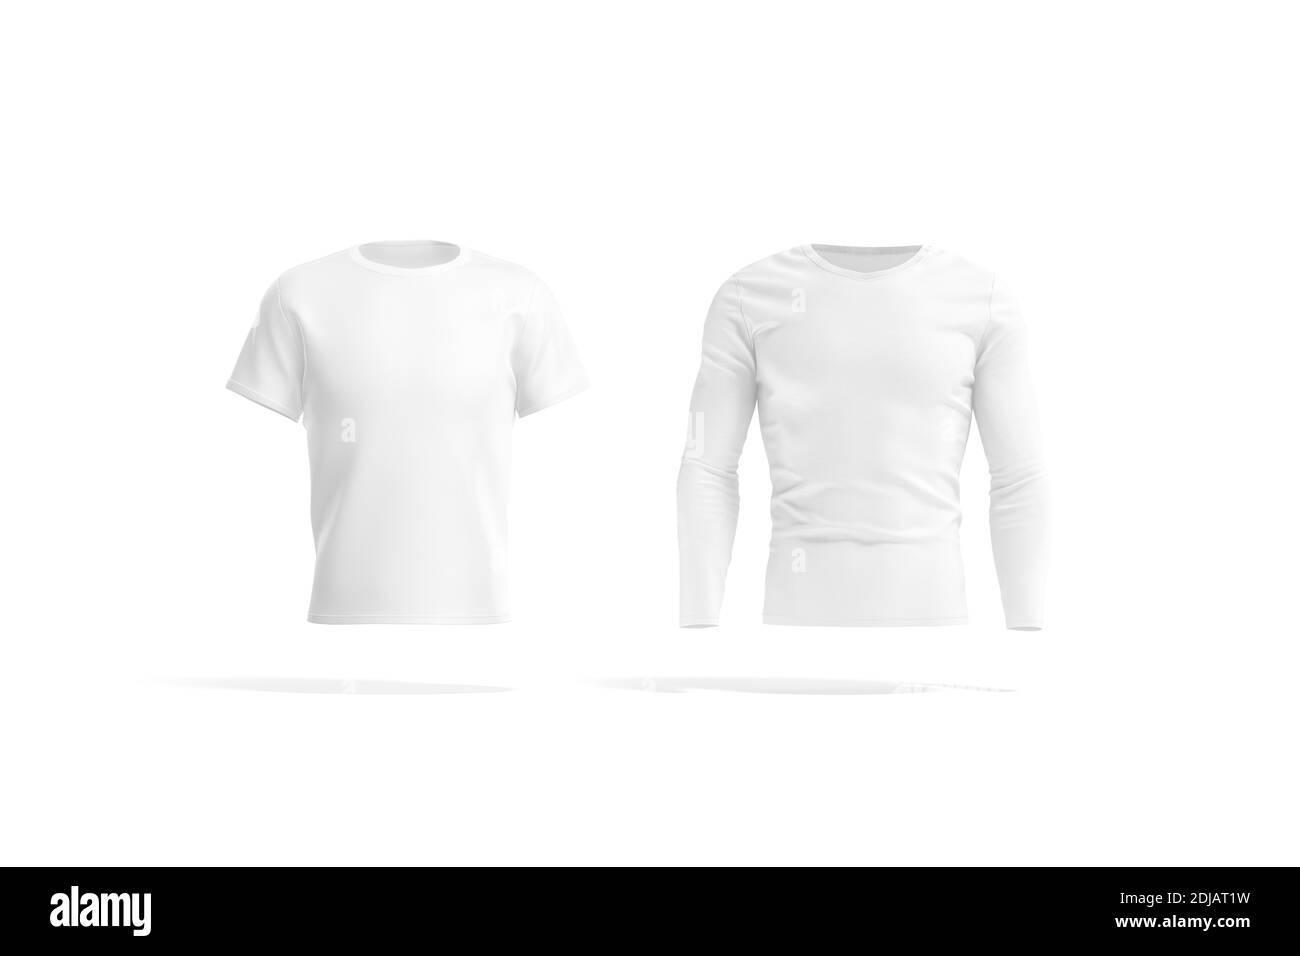 Long tee Black and White Stock Photos & Images - Alamy